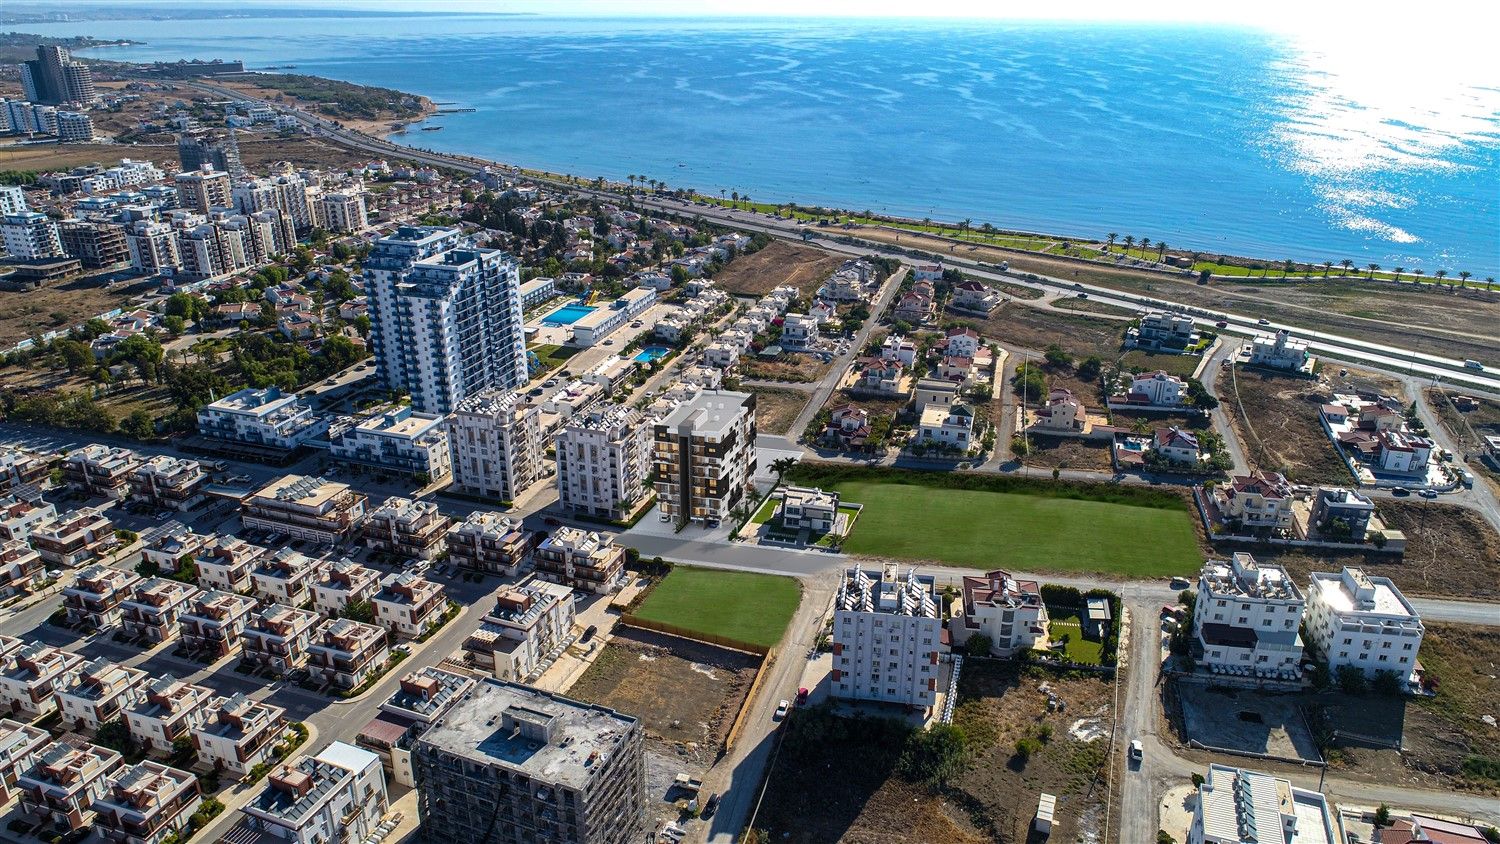 New project in Famagusta near the City mall